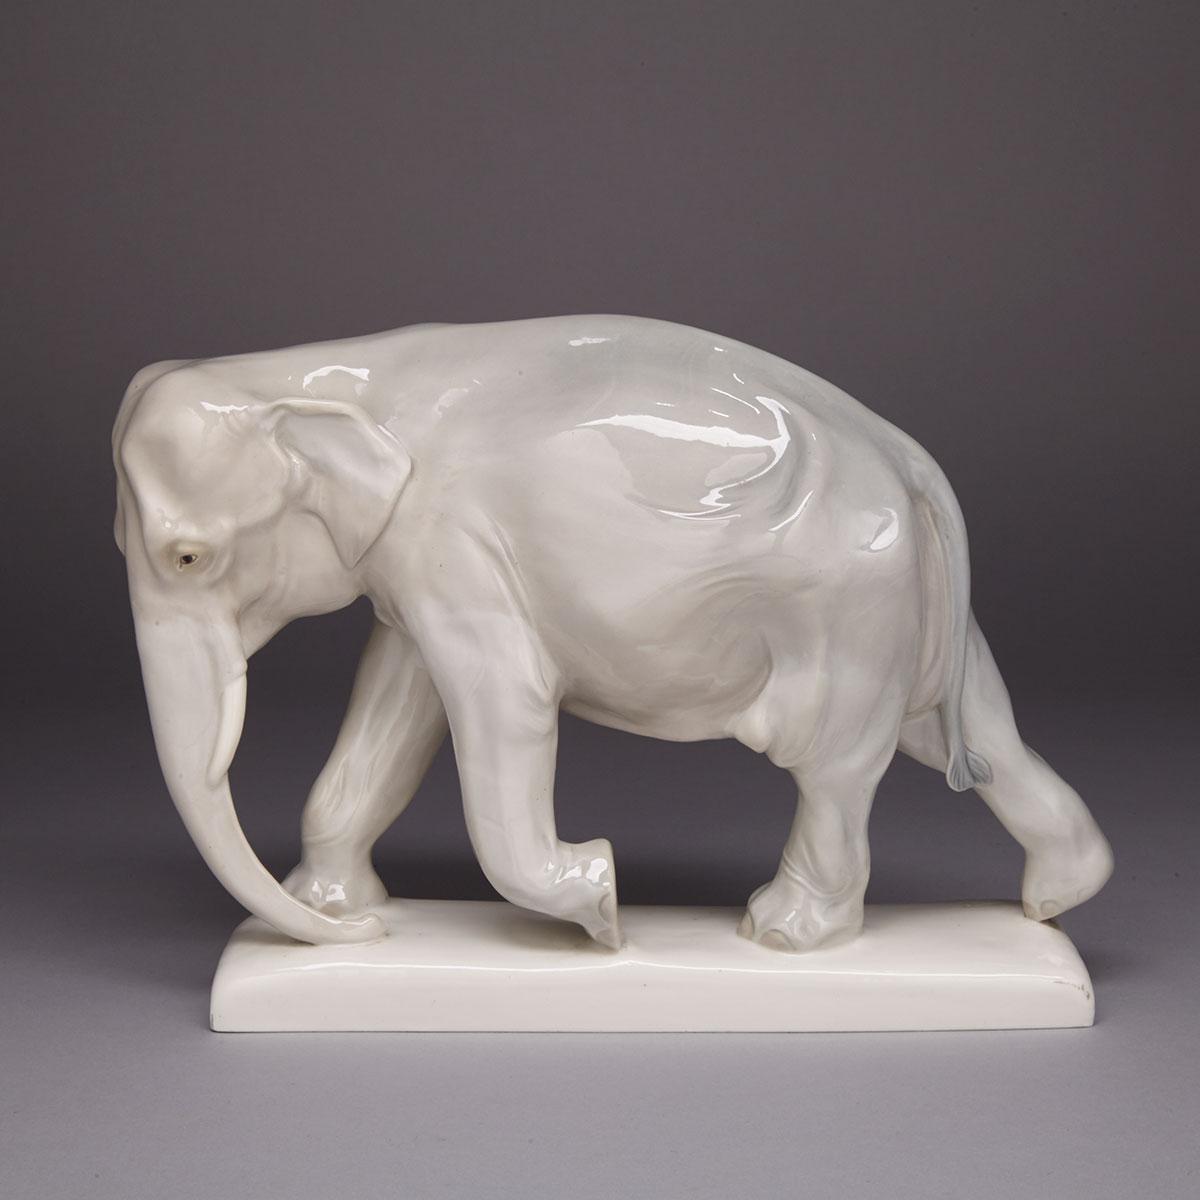 Meissen Figure of an Elephant, Paul Walther, 20th century